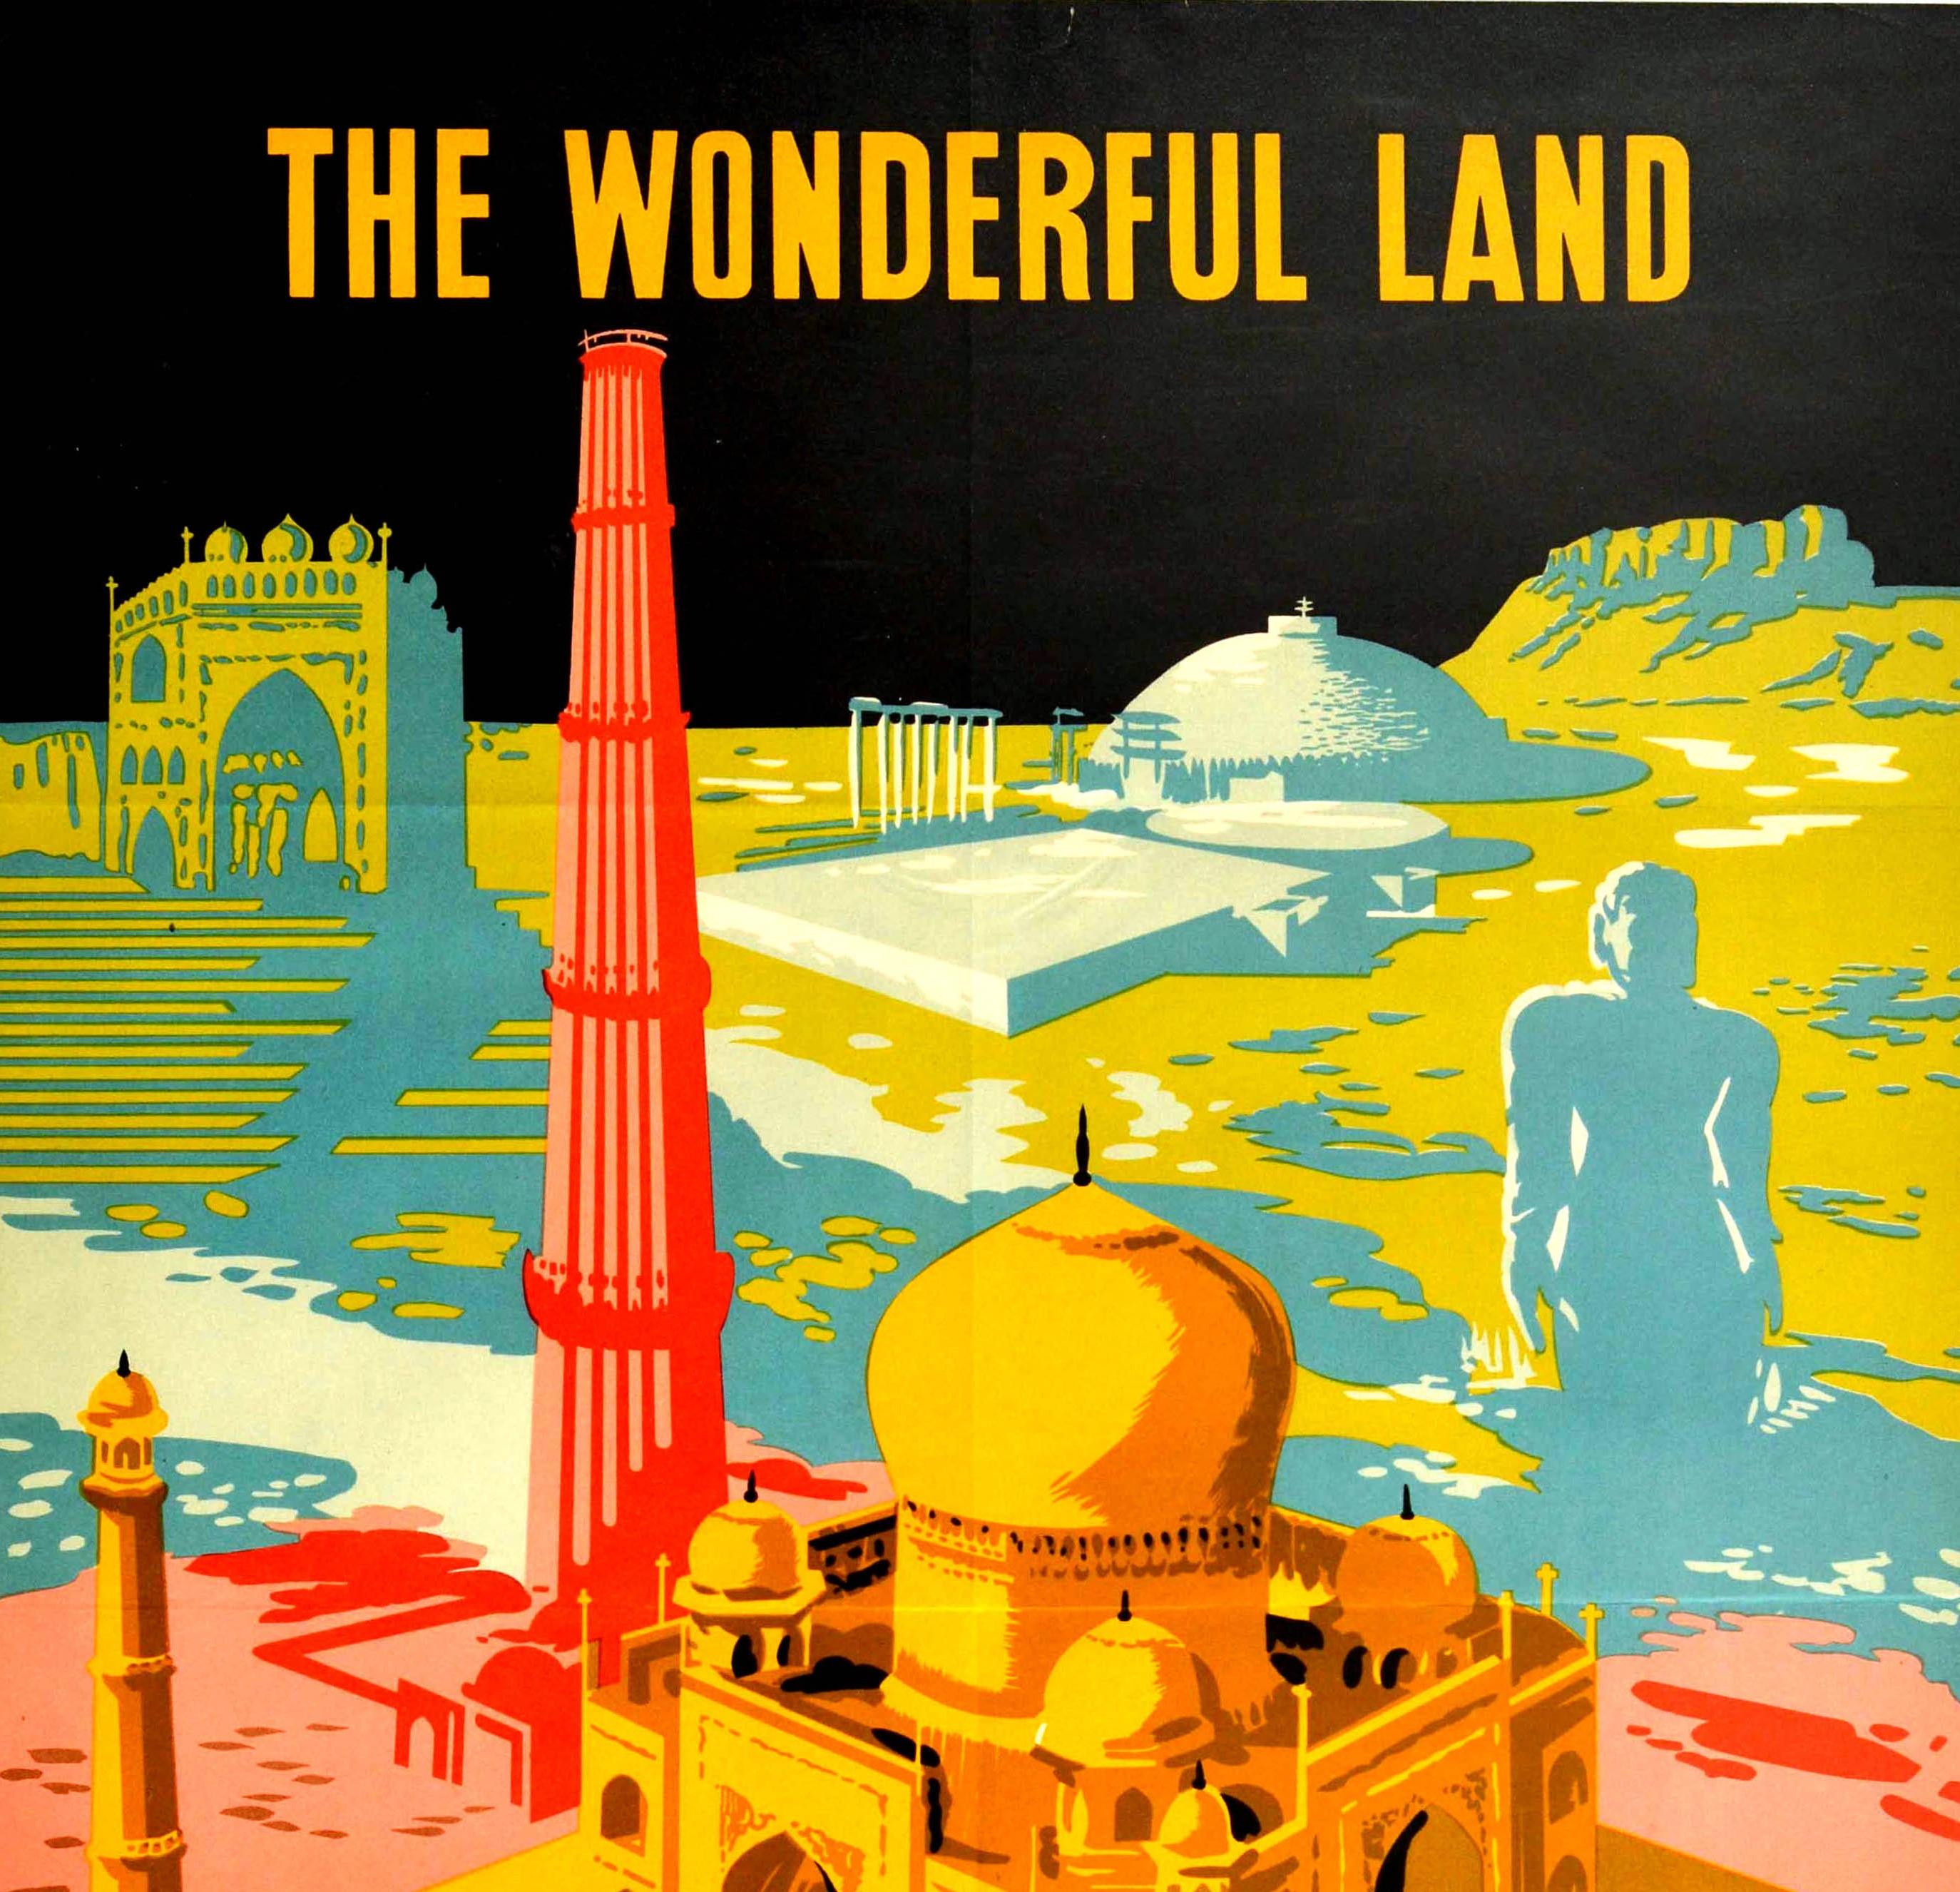 Original vintage travel poster for India The Wonderful Land featuring a colourful design of historical heritage sites and iconic Indian landmarks including the Qutb Minar minaret victory tower (completed 1220) in Delhi, the Taj Mahal (built 1632-53)